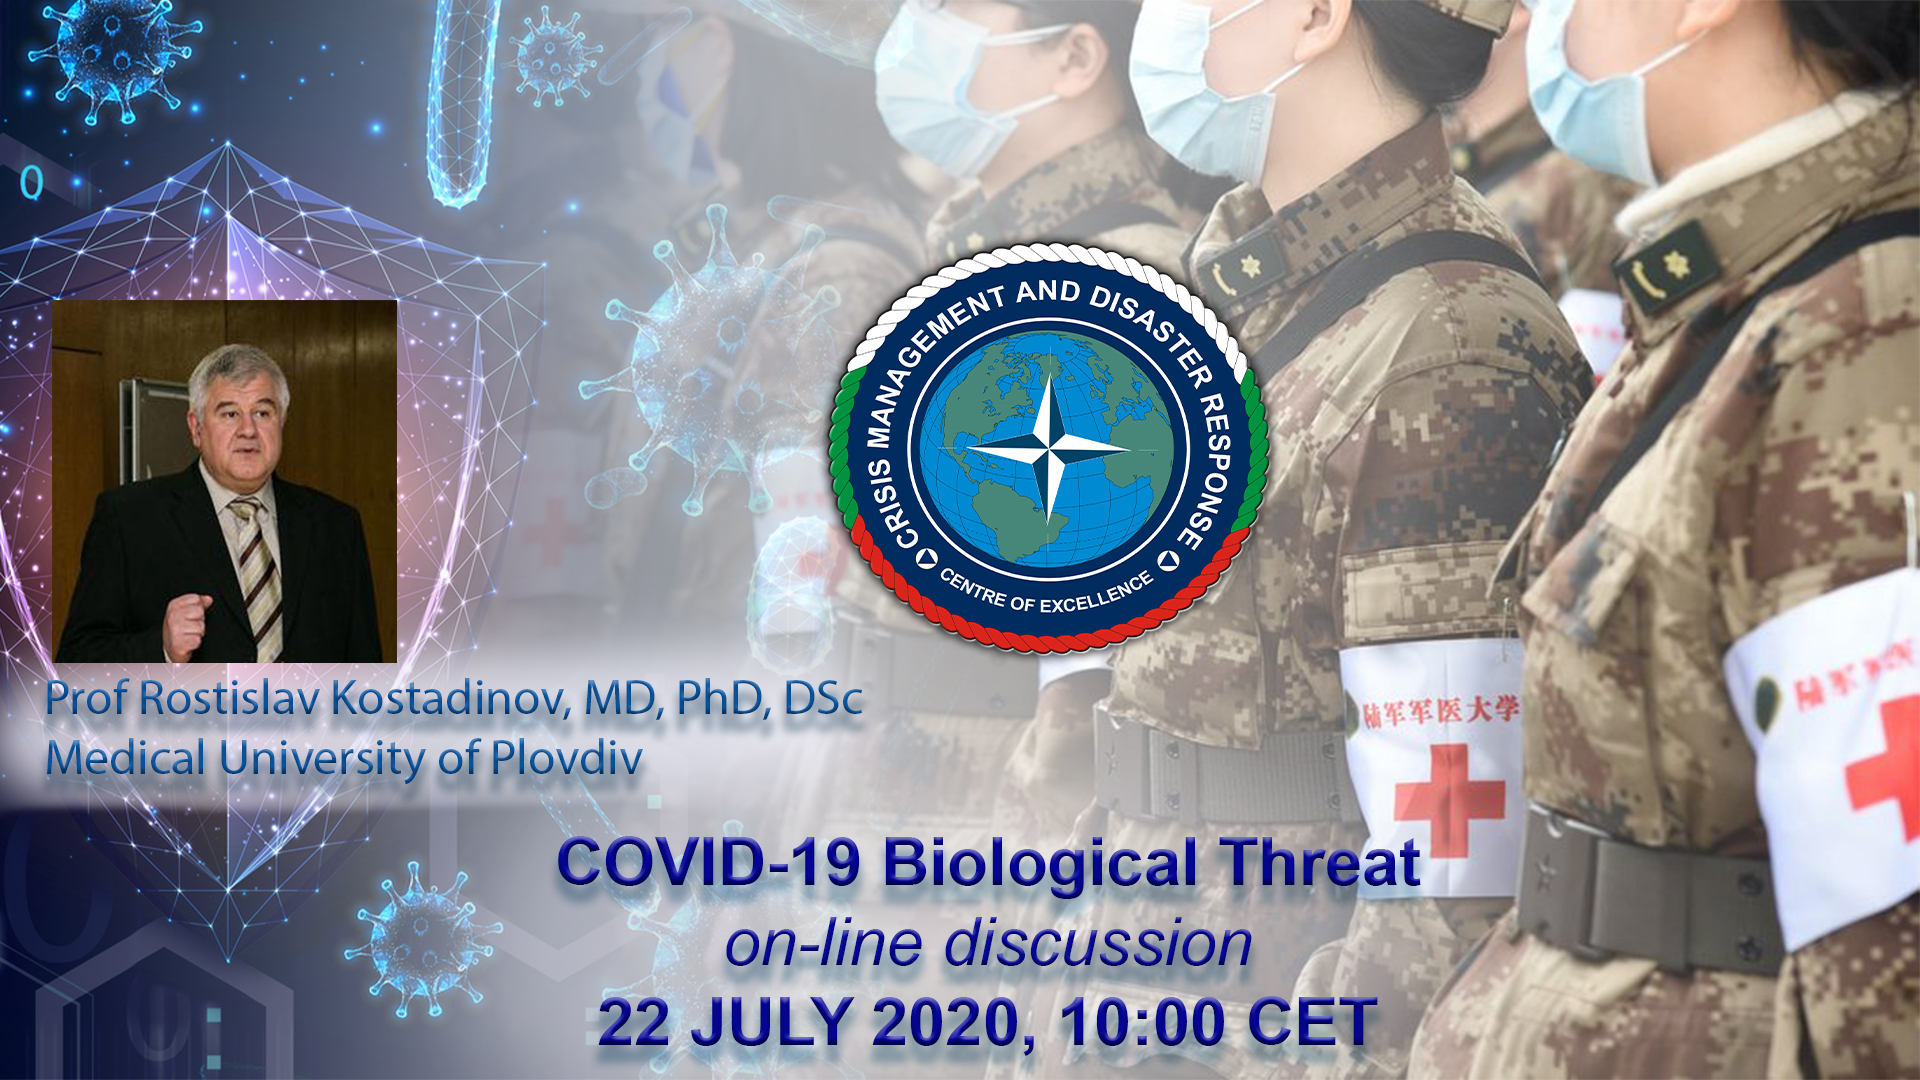 On-line discussion on “COVID-19 Biological Threat-Military Medical Challenges”